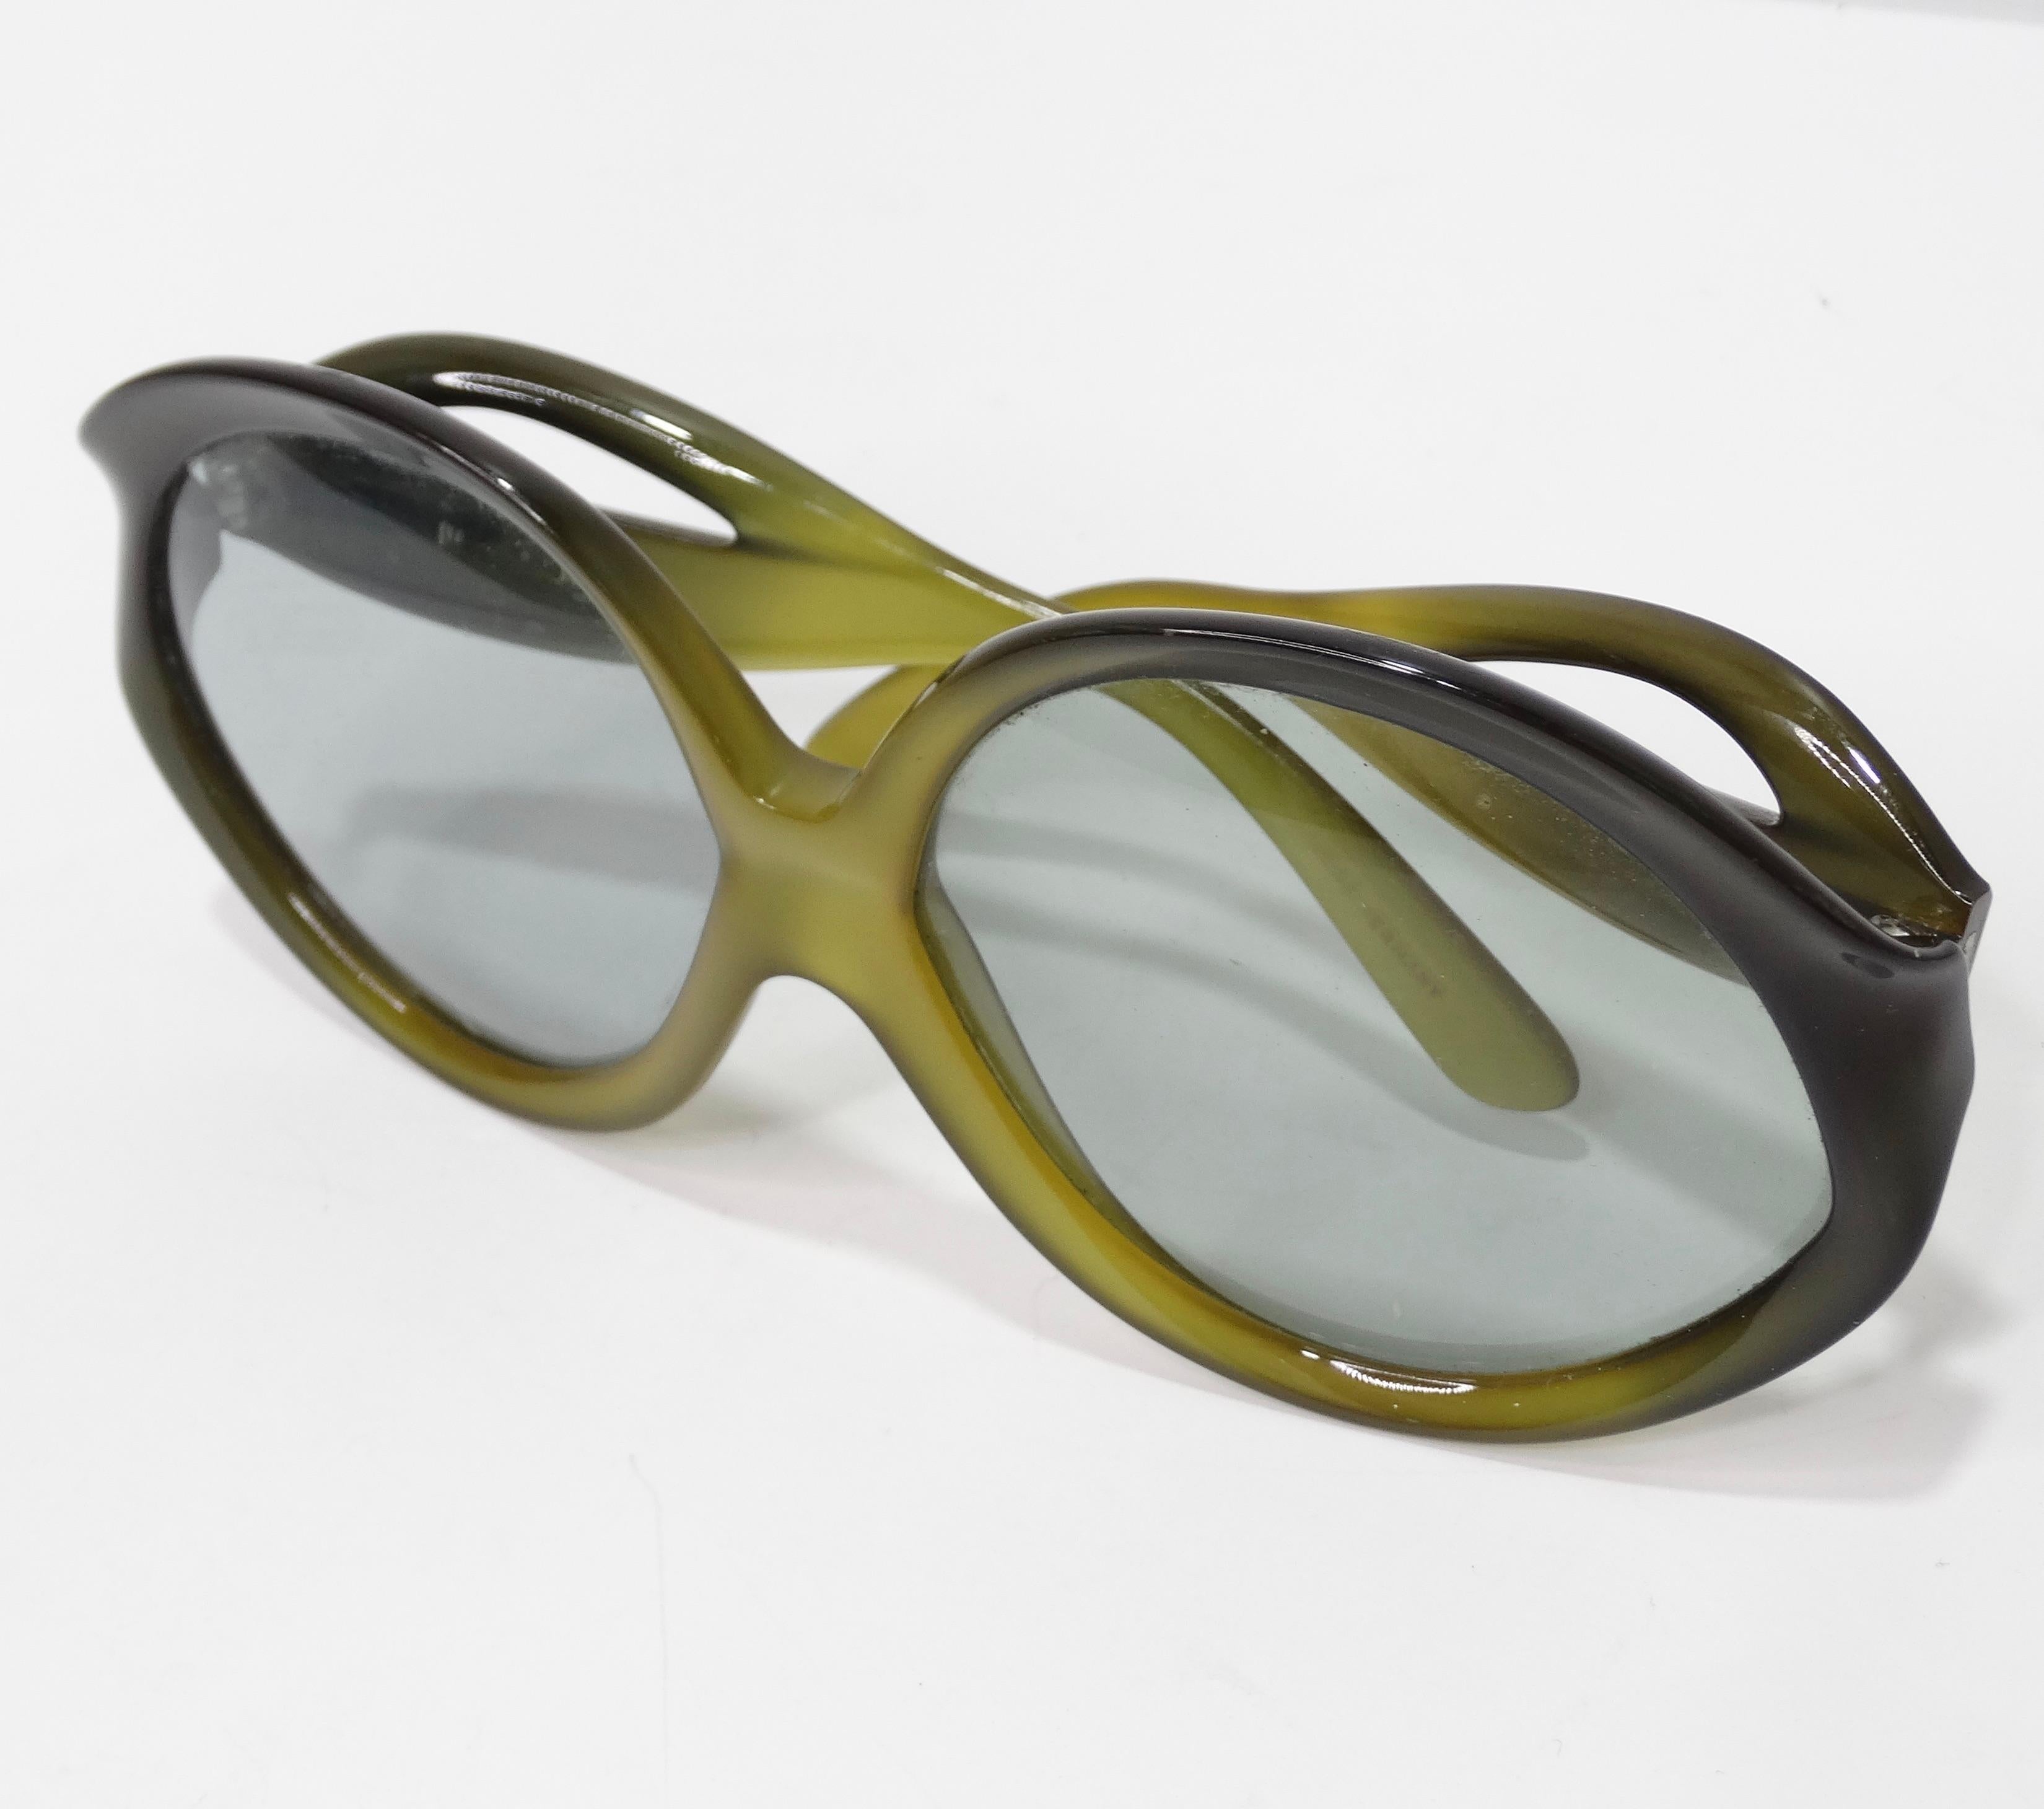 These statement sunglasses are a must have for all your summer looks! Gorgeous, Miss Dior green and black gradient sunnies. Perfect for anyone nostalgic for the 60's that loves a round frame. Pair with a Missoni beach cover-up and Chanel tote bag to